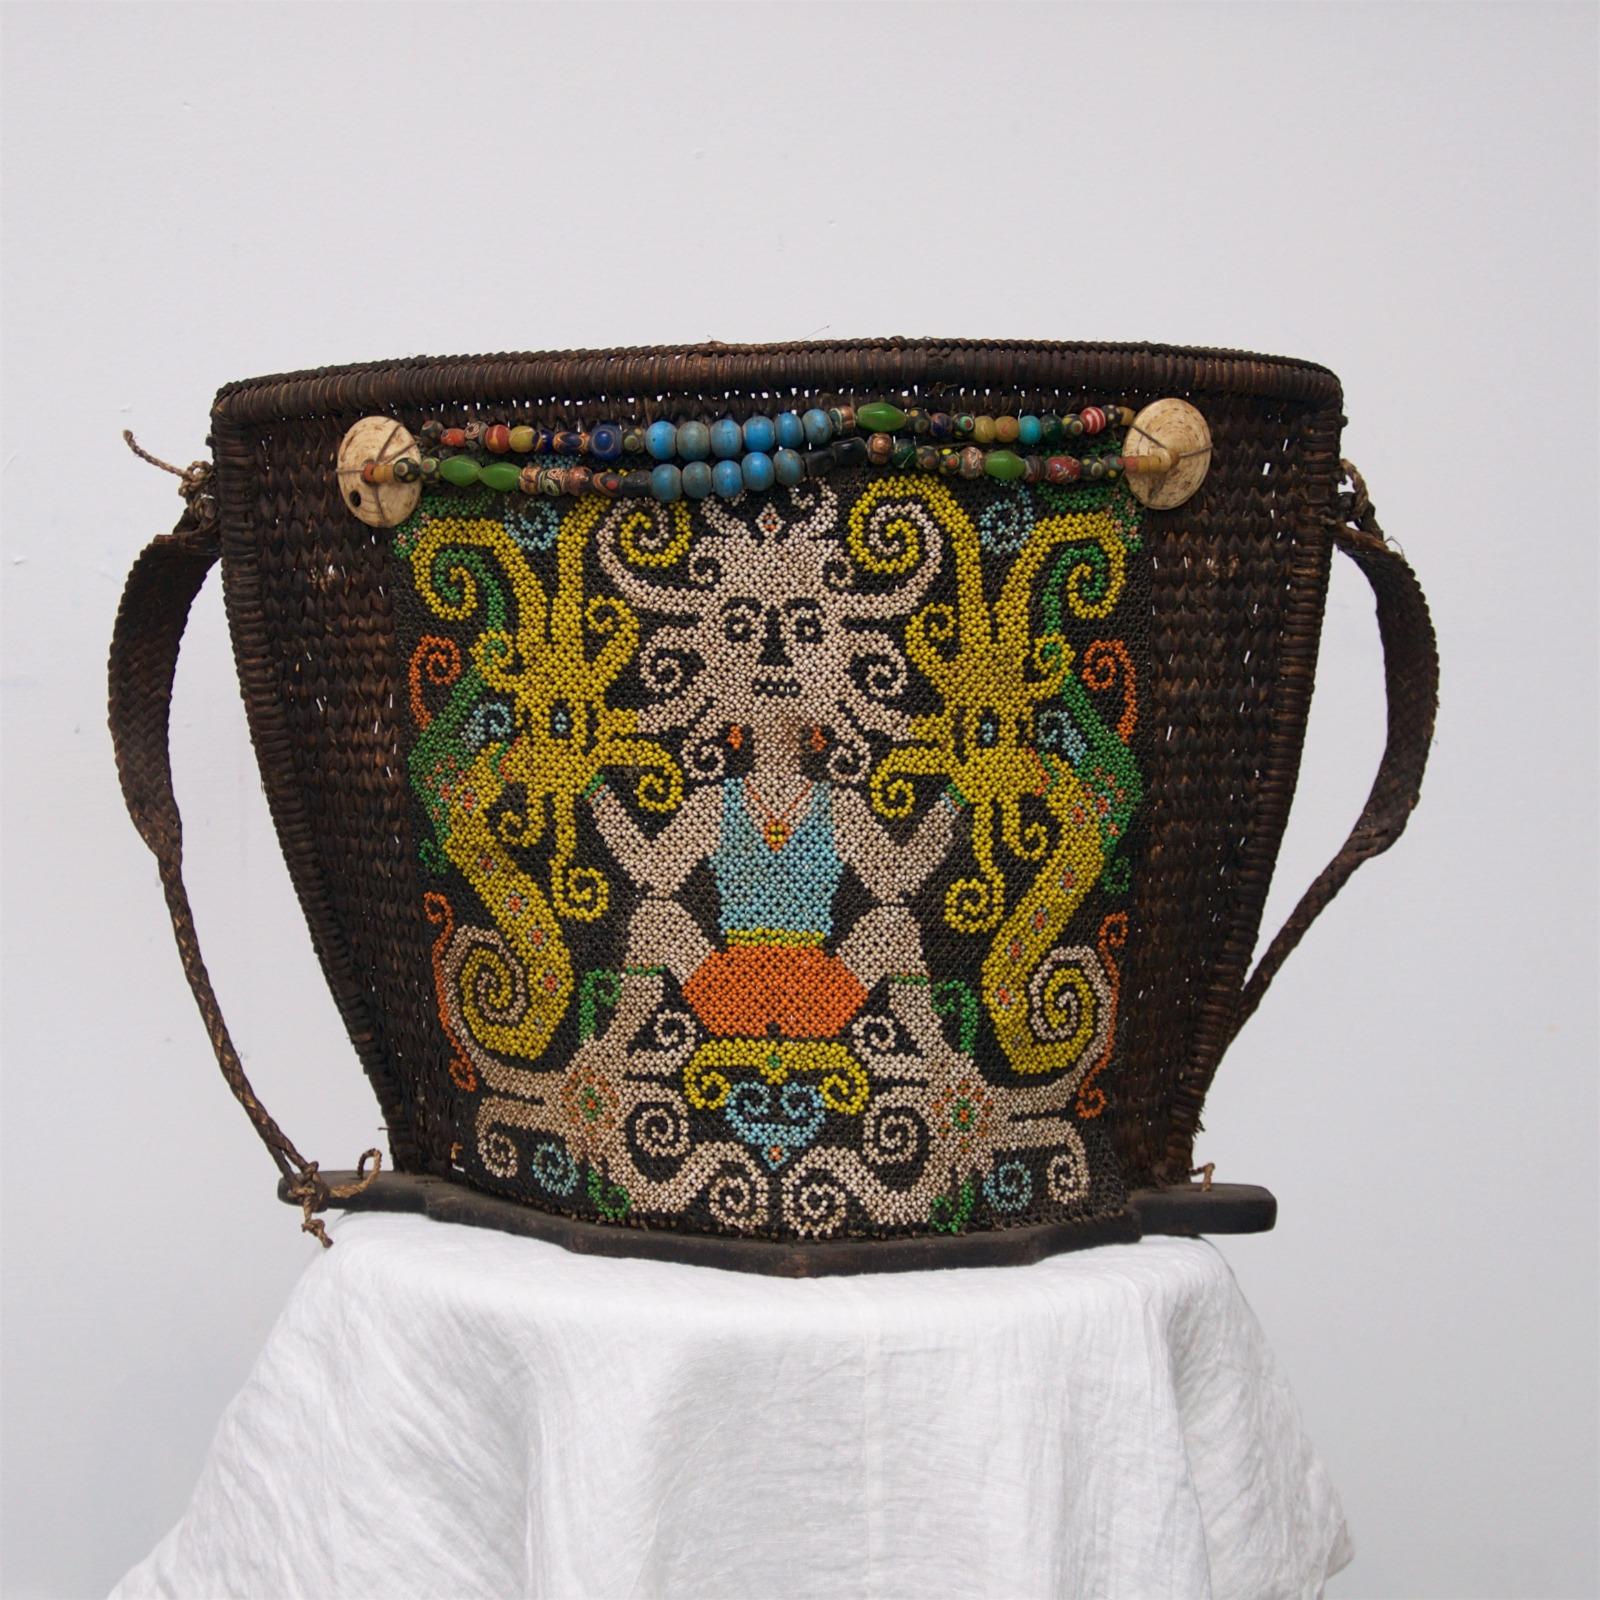 Indonesian Baby Carrier Dayak Borneo Vintage For Sale